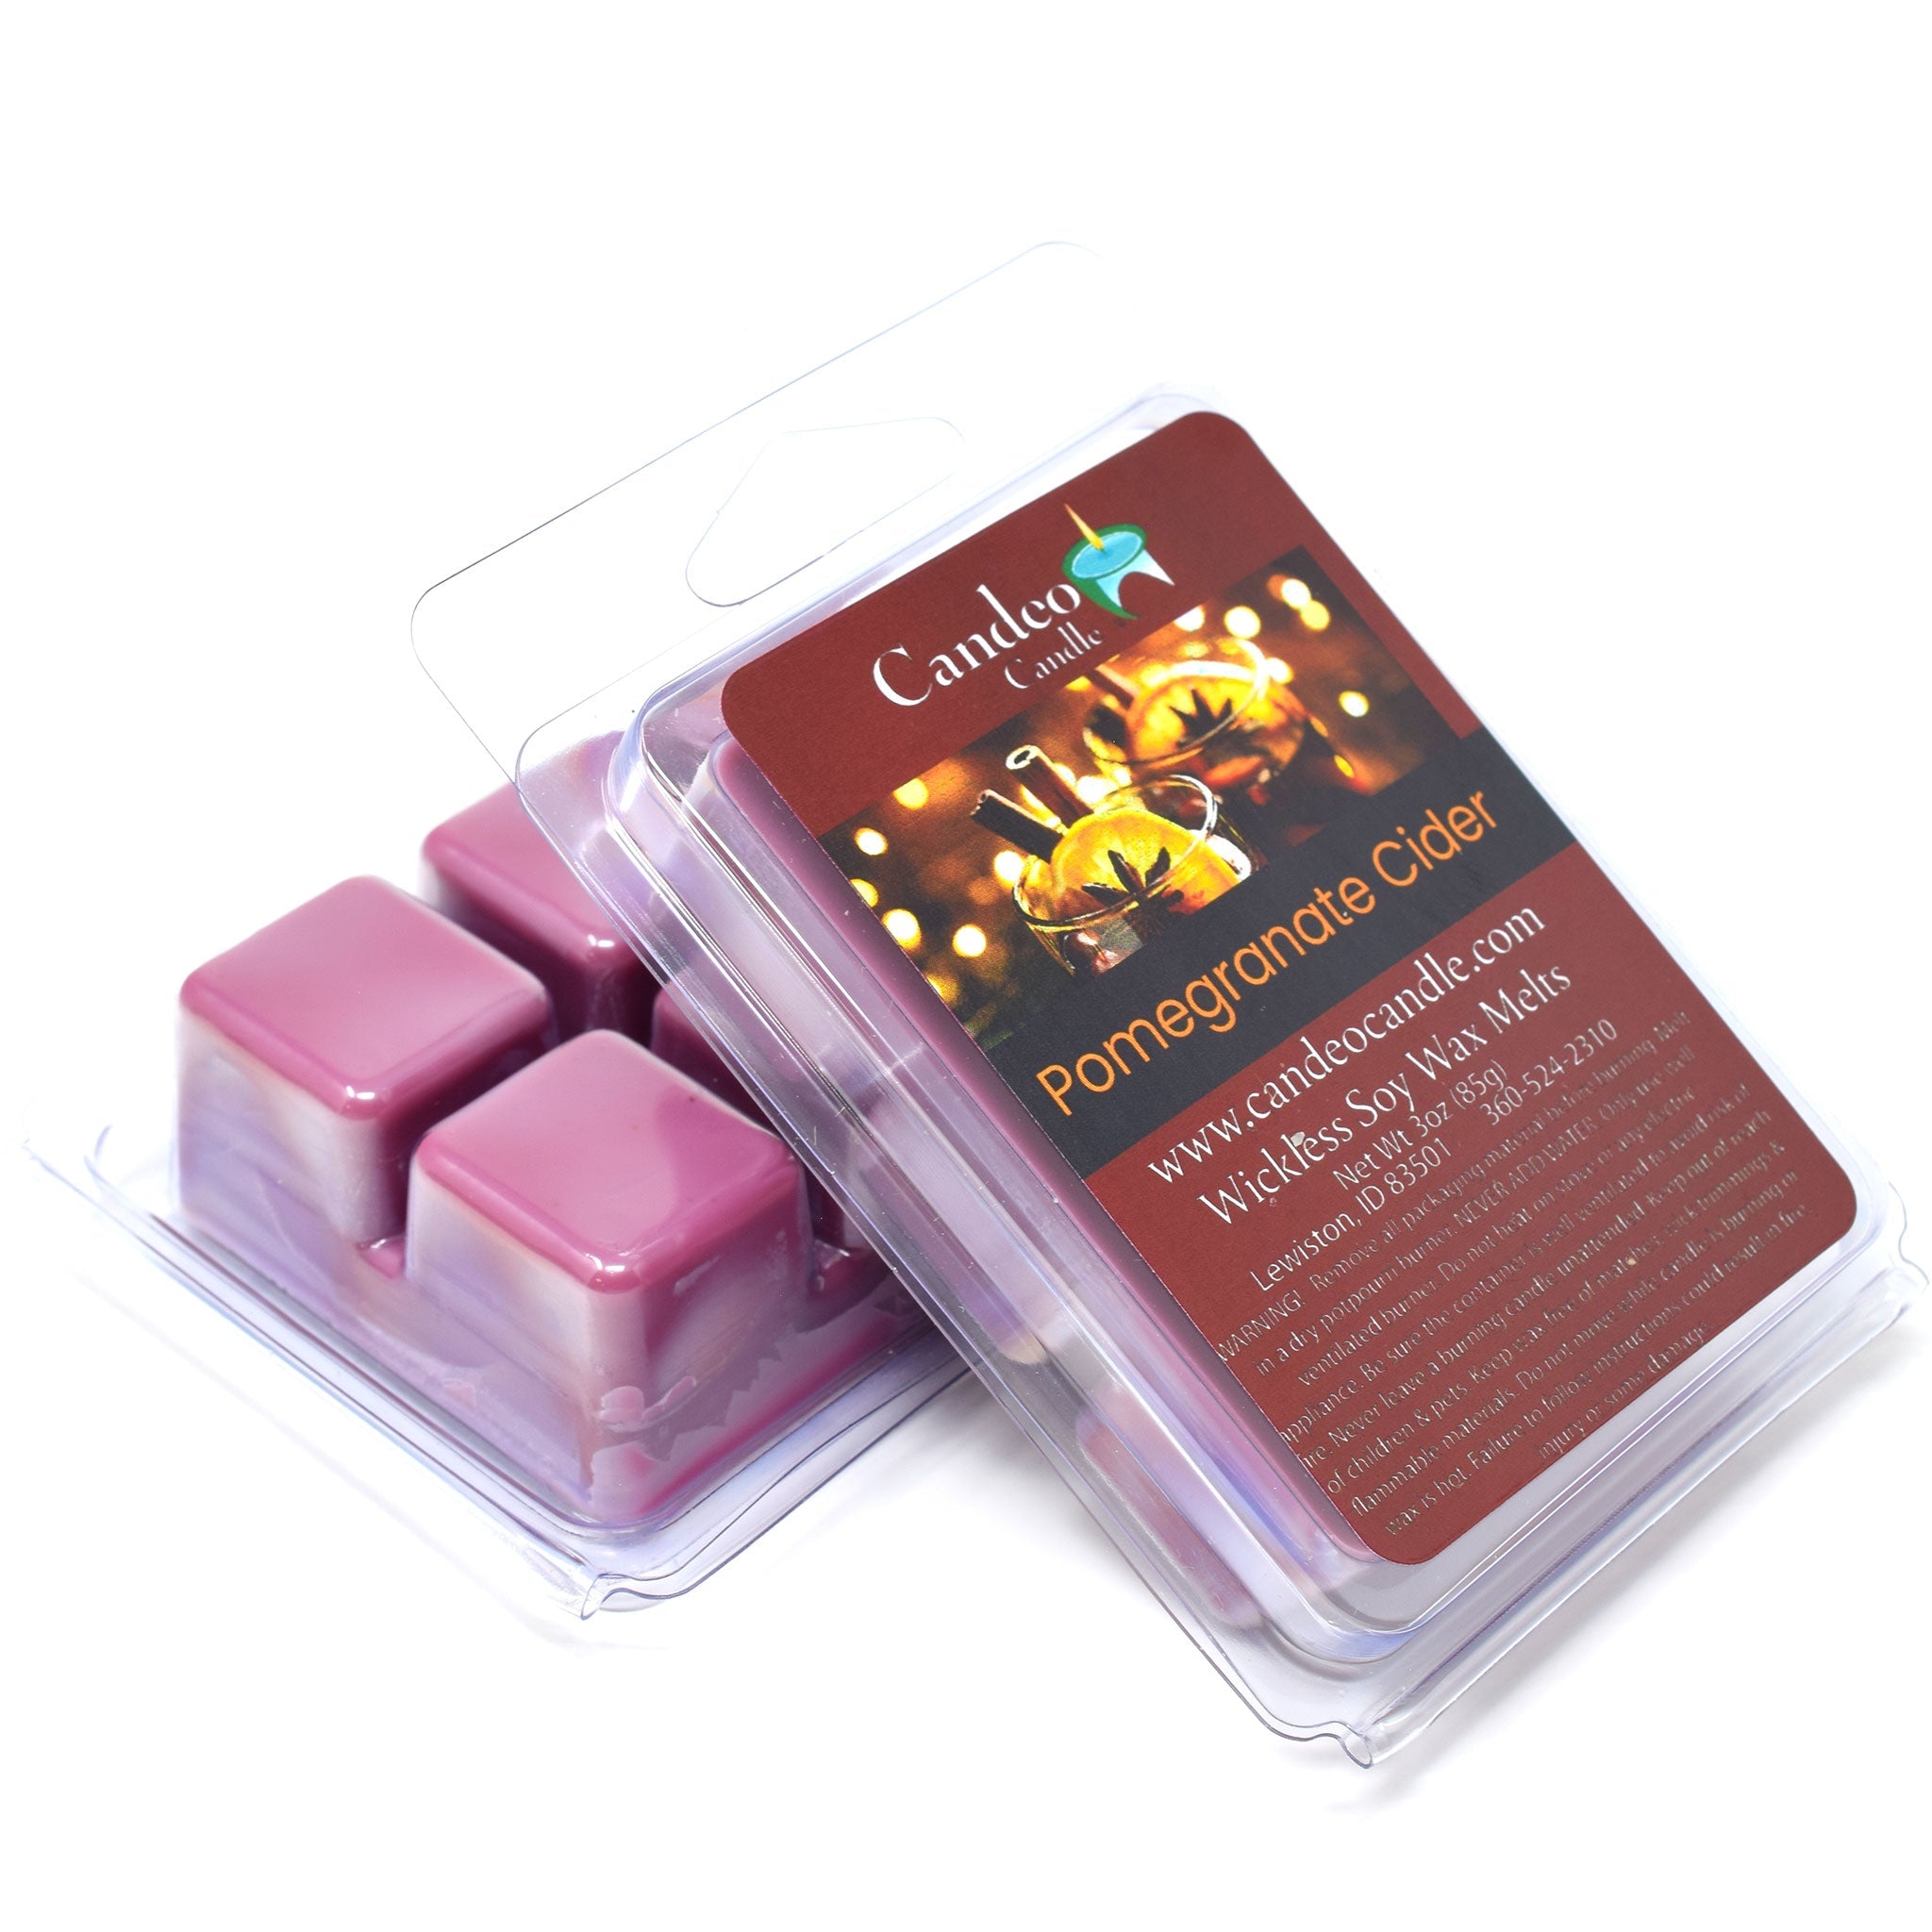 Pomegranate Cider, Soy Melt Cubes, 2-Pack - Candeo Candle